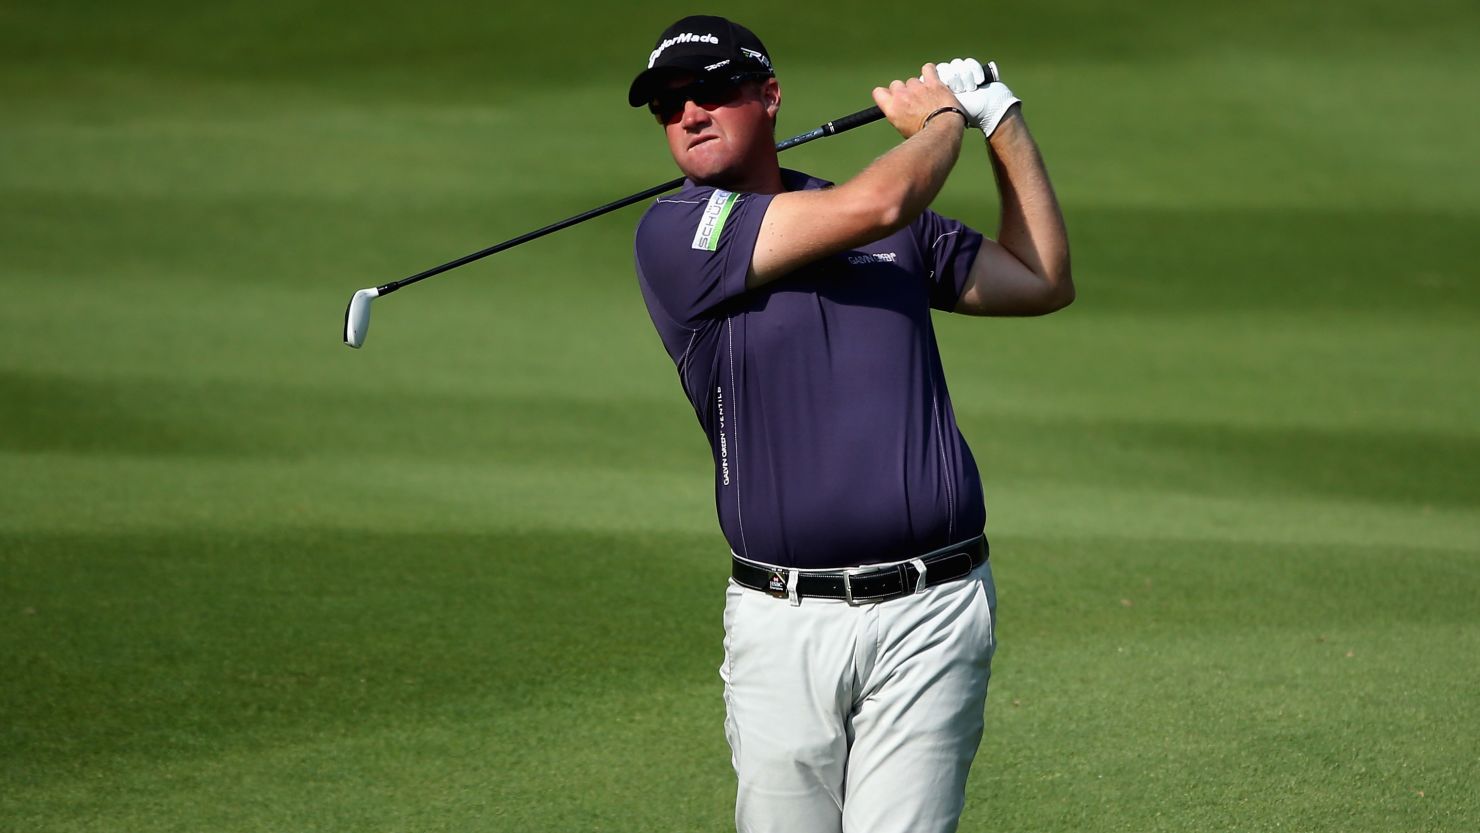 Peter Hanson is determined to catch Rory McIlroy in the Race for Dubai by claiming victory at Mission Hills.